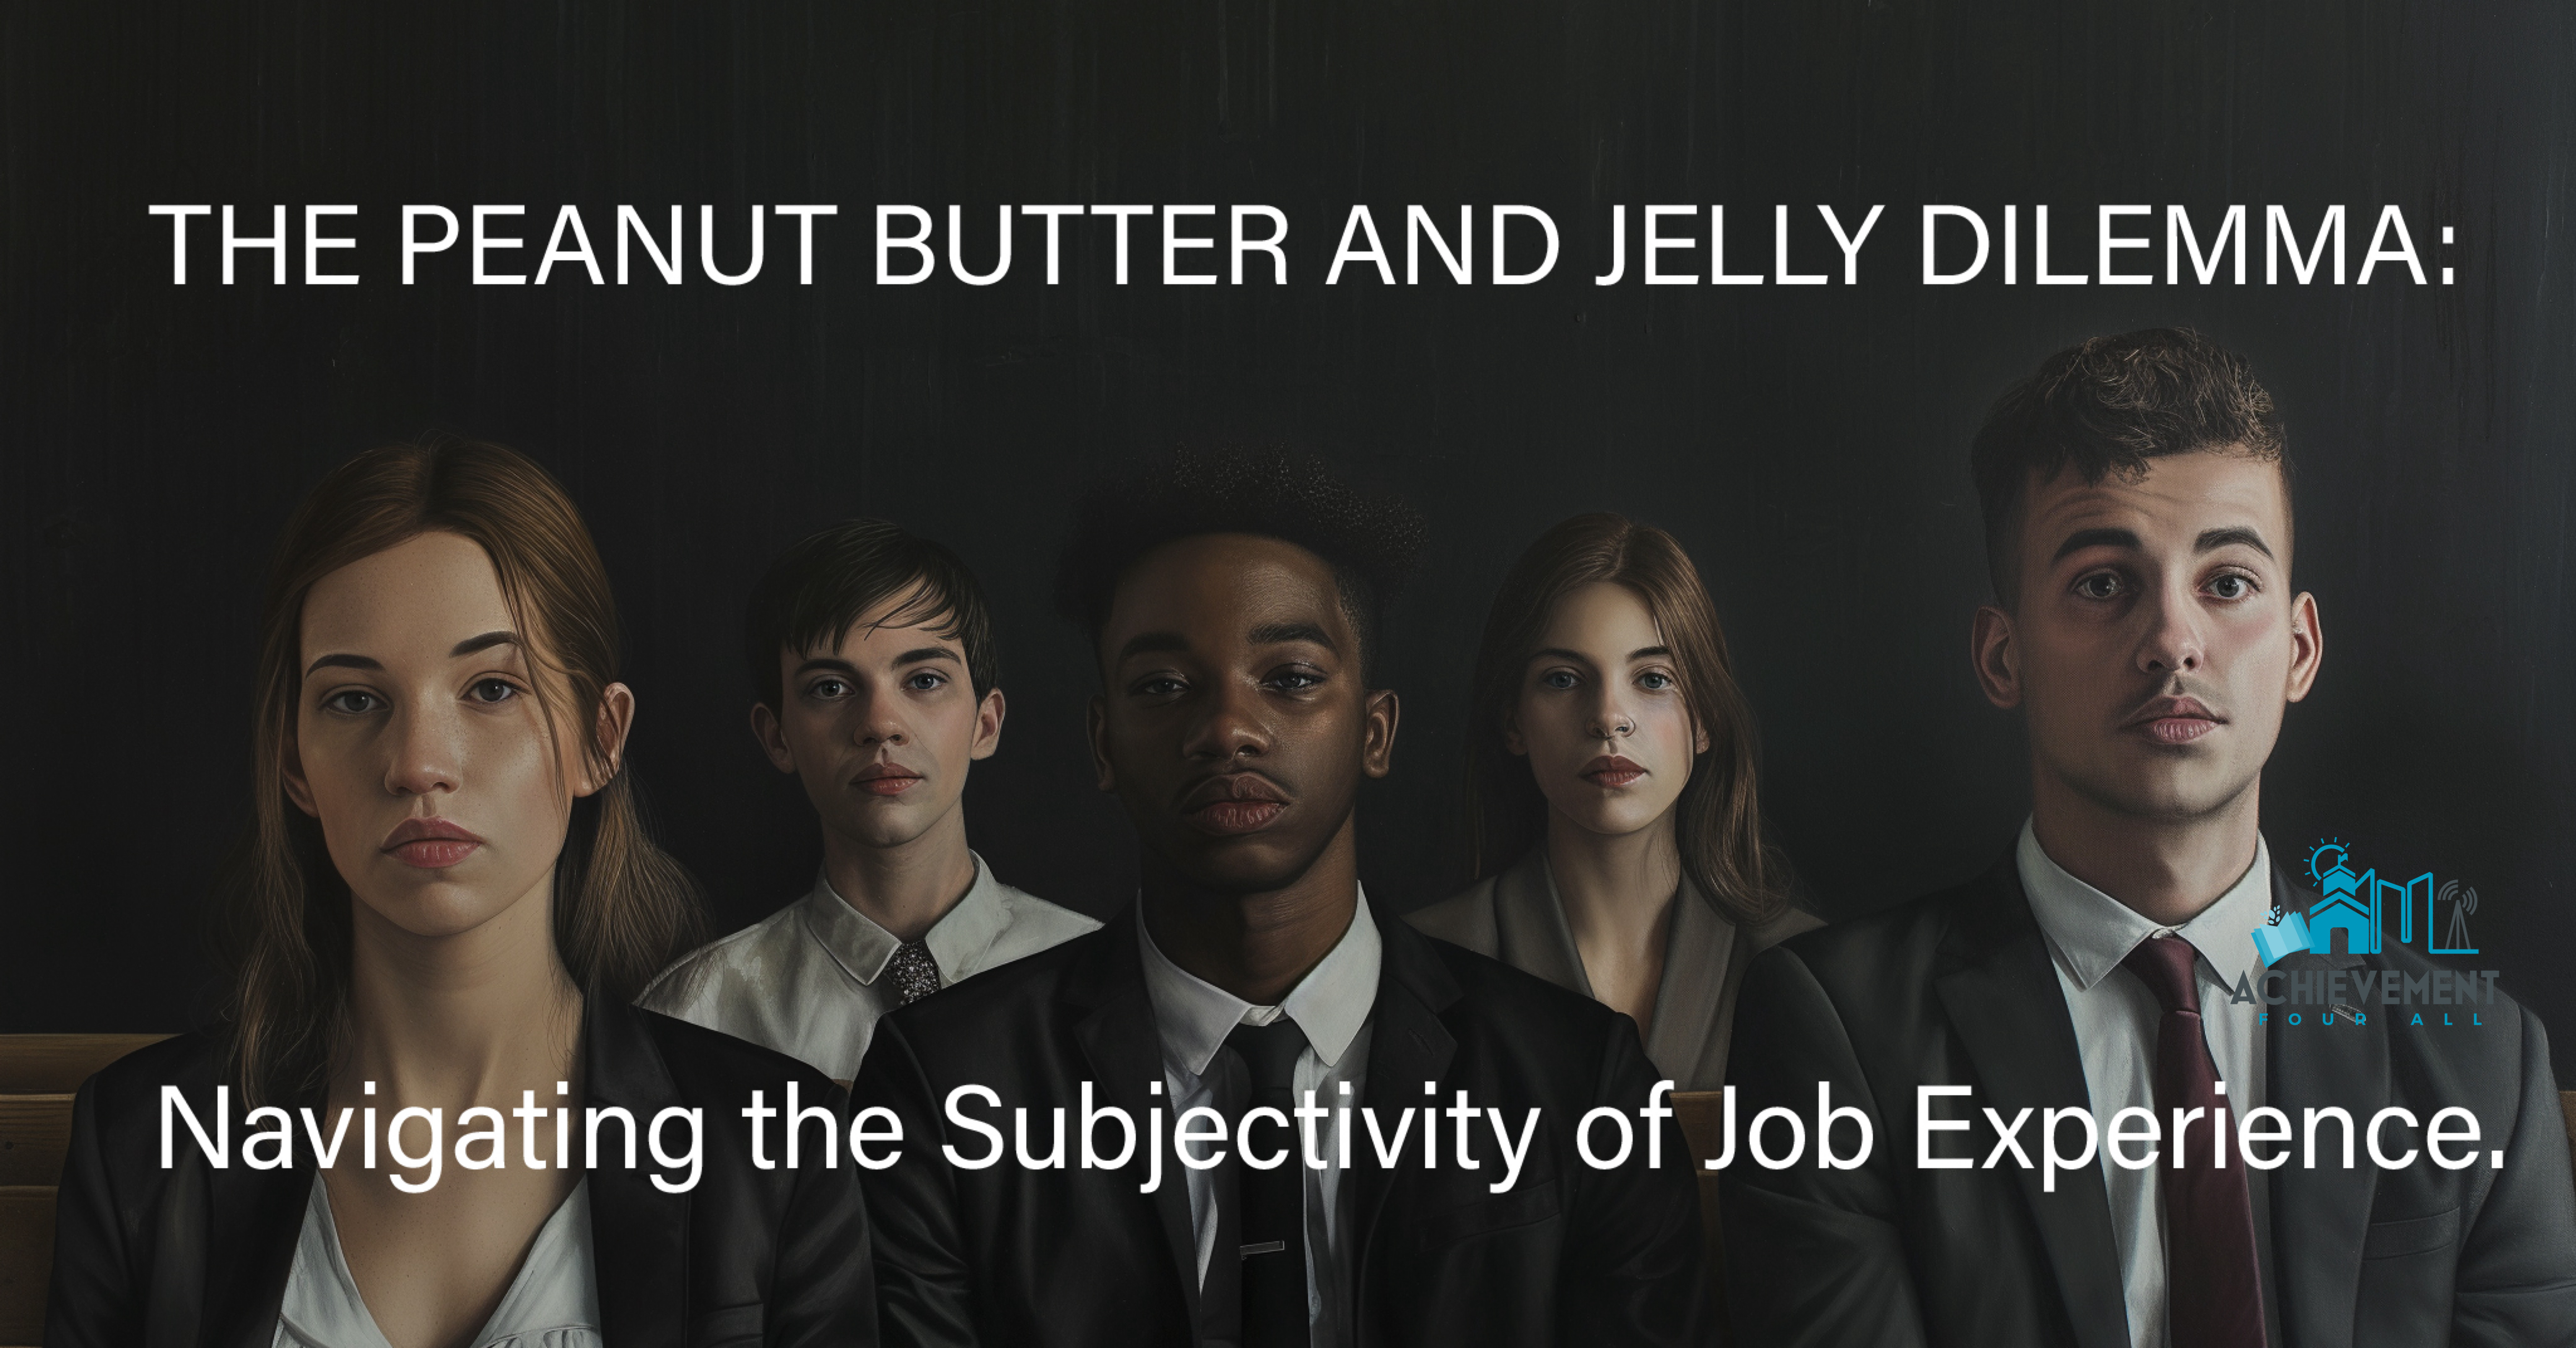 The Peanut Butter and Jelly Dilemma: Navigating the Subjectivity of Job Experience